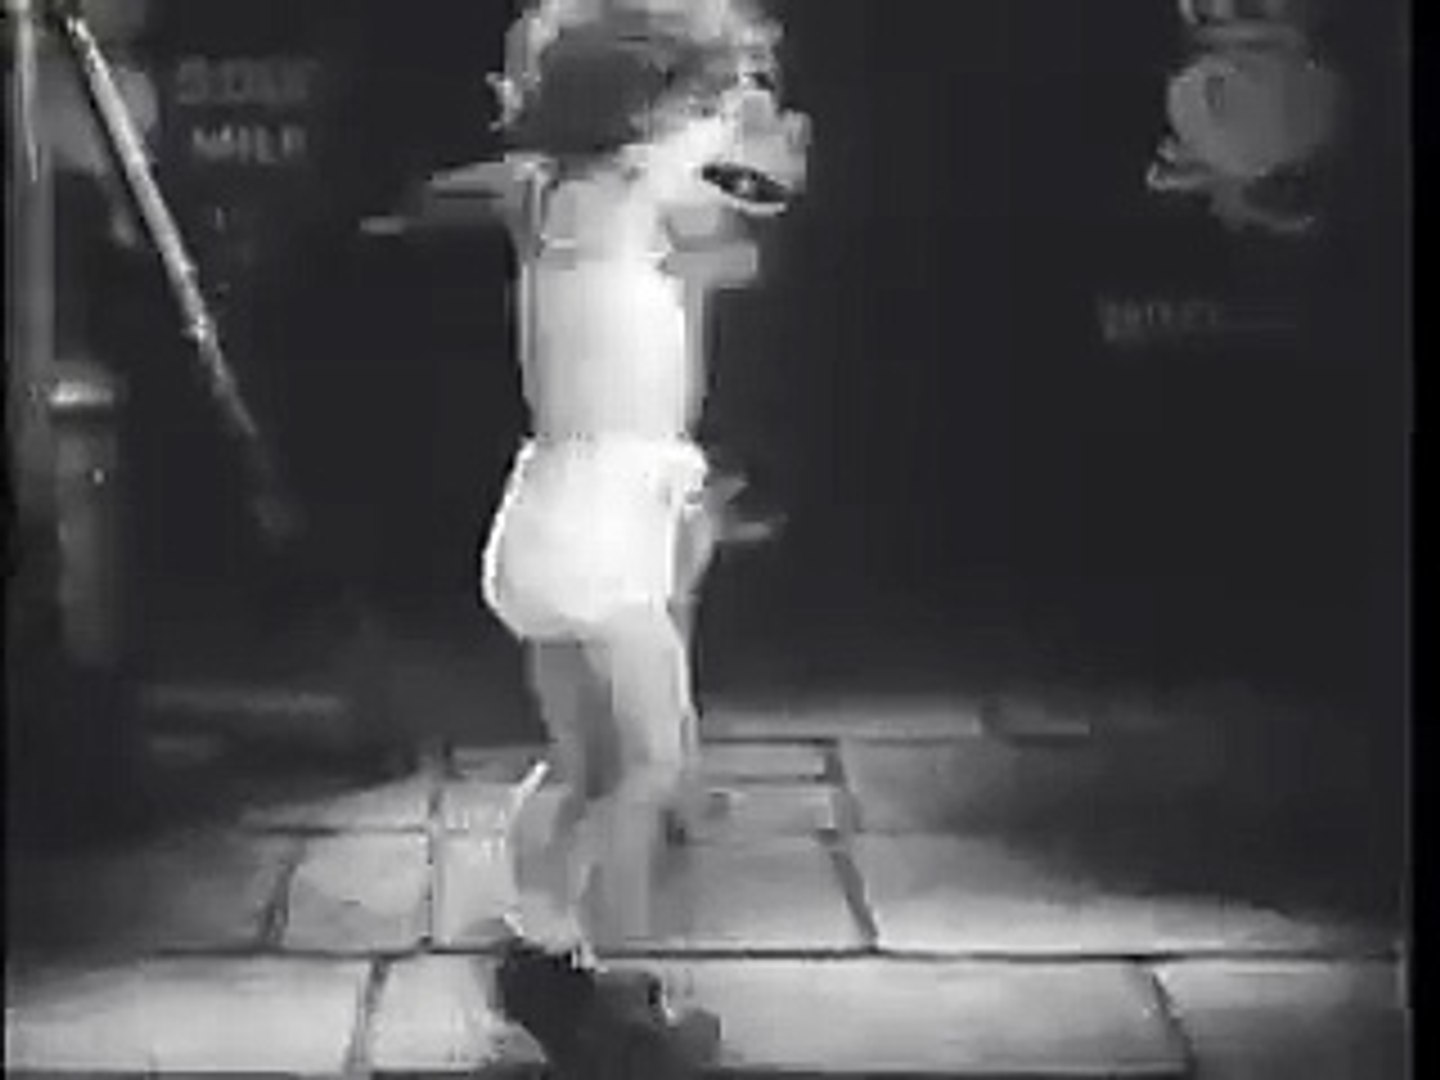 Shirley temple nudes